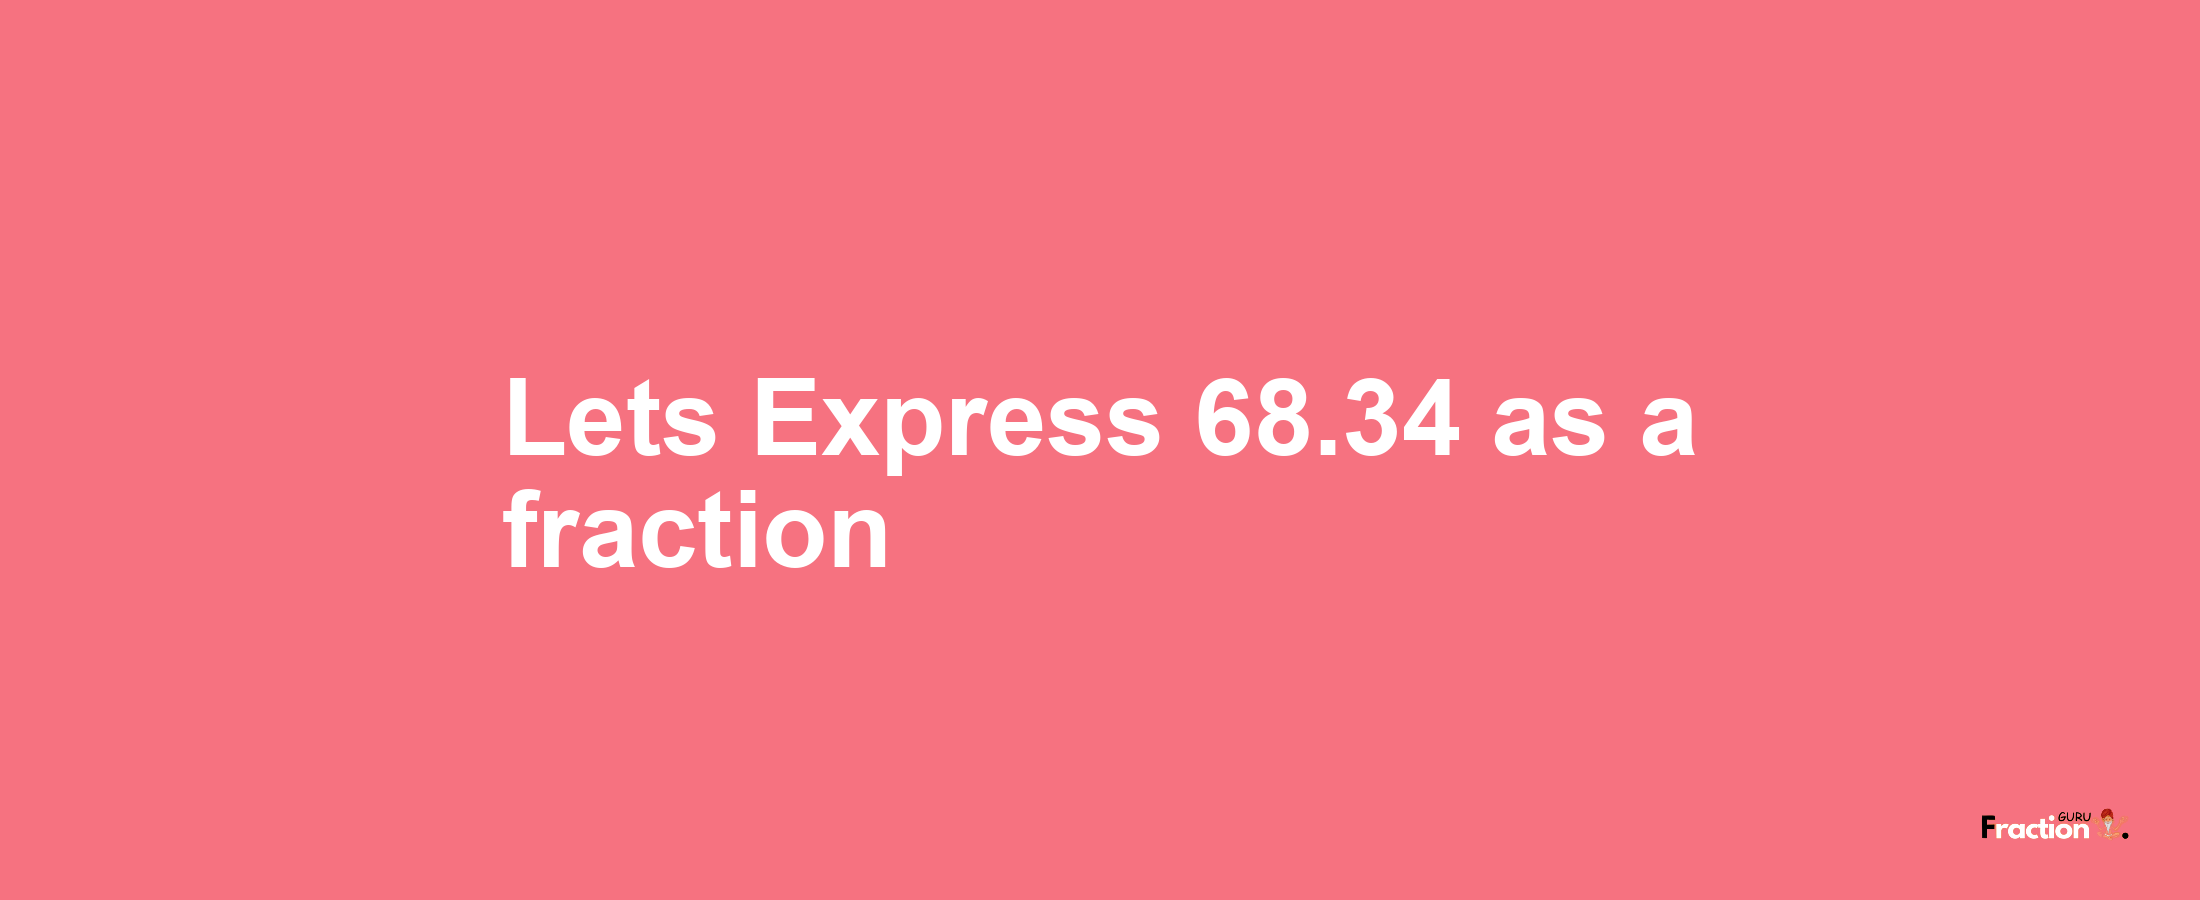 Lets Express 68.34 as afraction